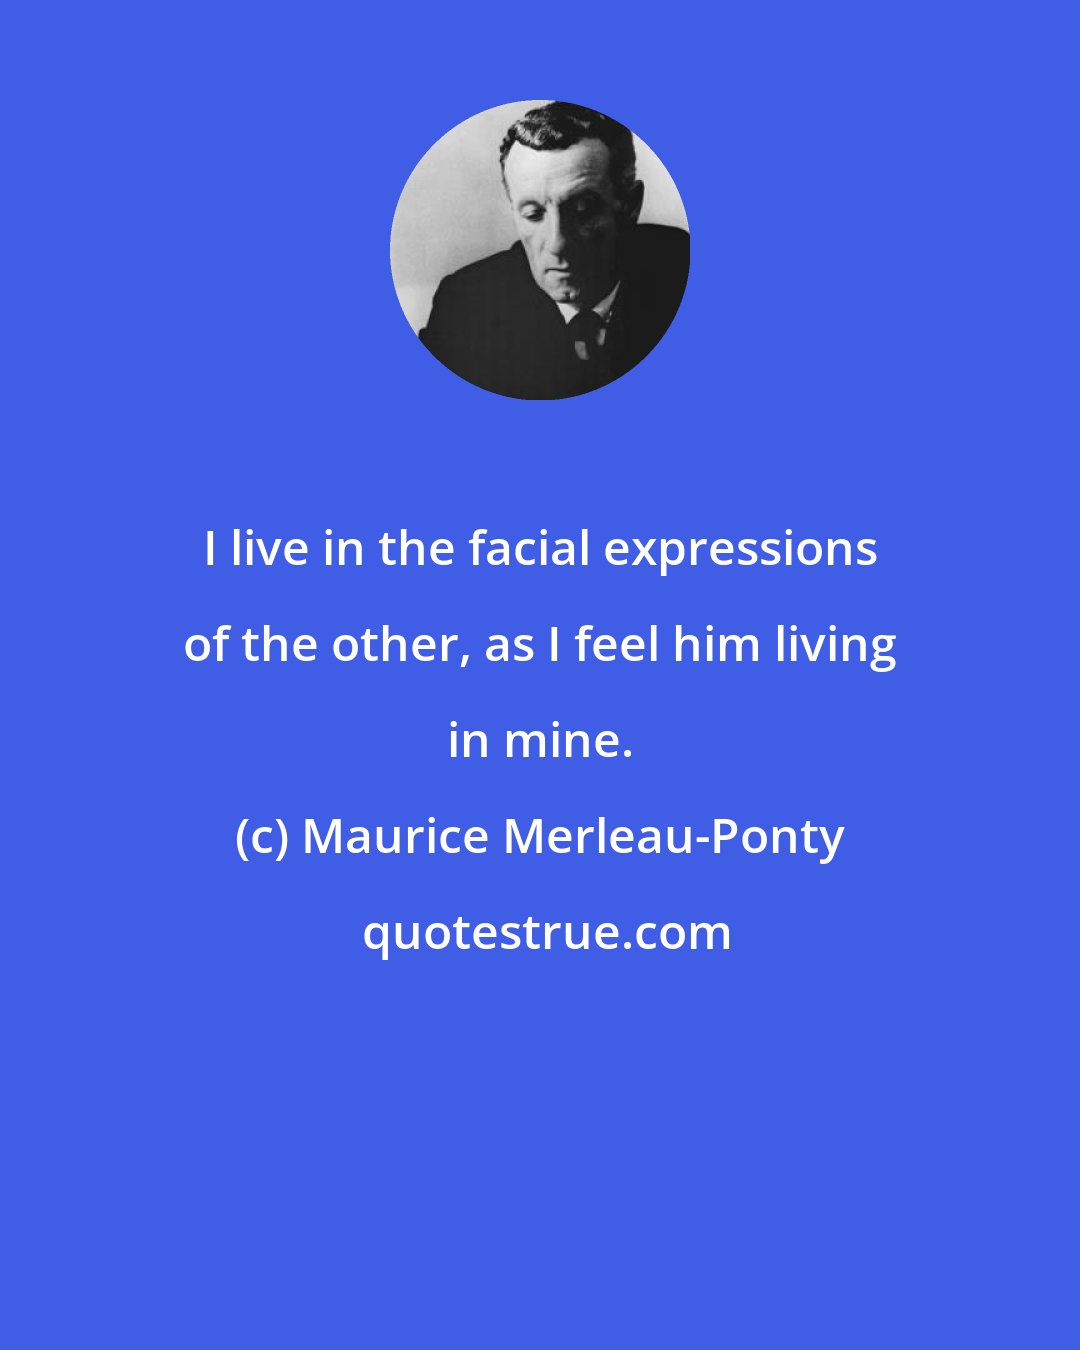 Maurice Merleau-Ponty: I live in the facial expressions of the other, as I feel him living in mine.